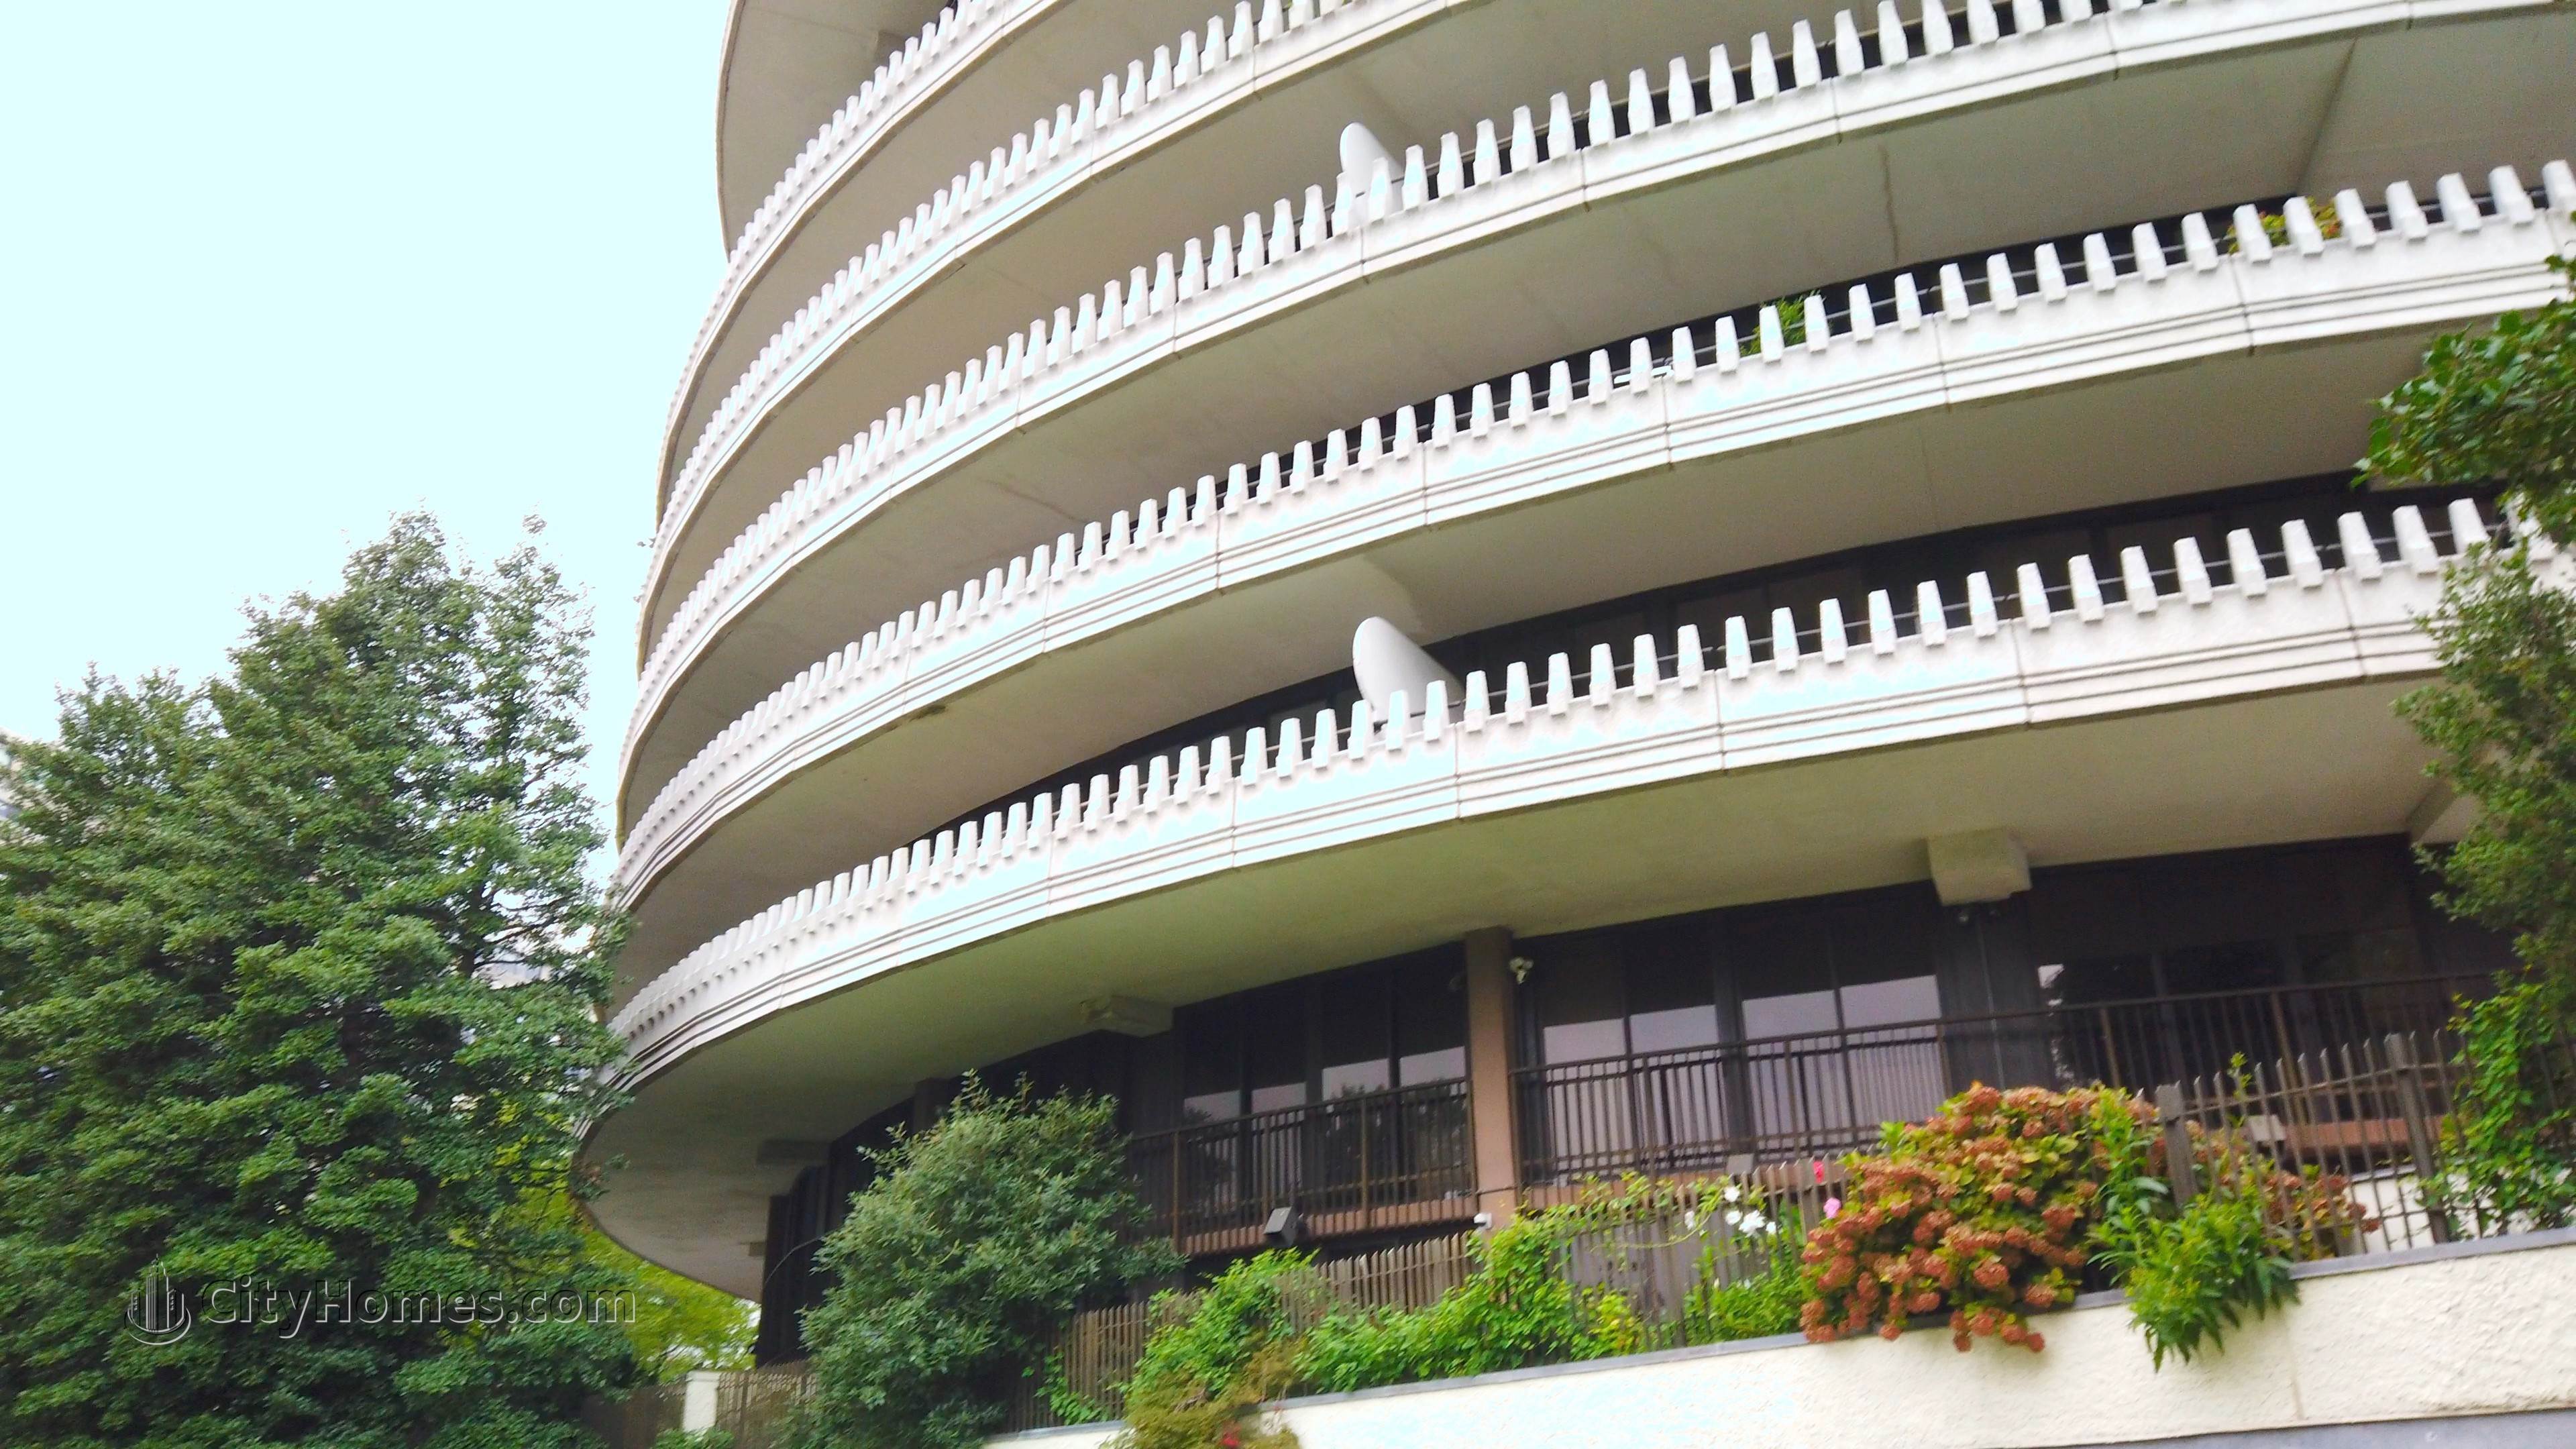 5. The Watergate xây dựng tại 700 New Hampshire Ave NW, Foggy Bottom, Washington, DC 20037